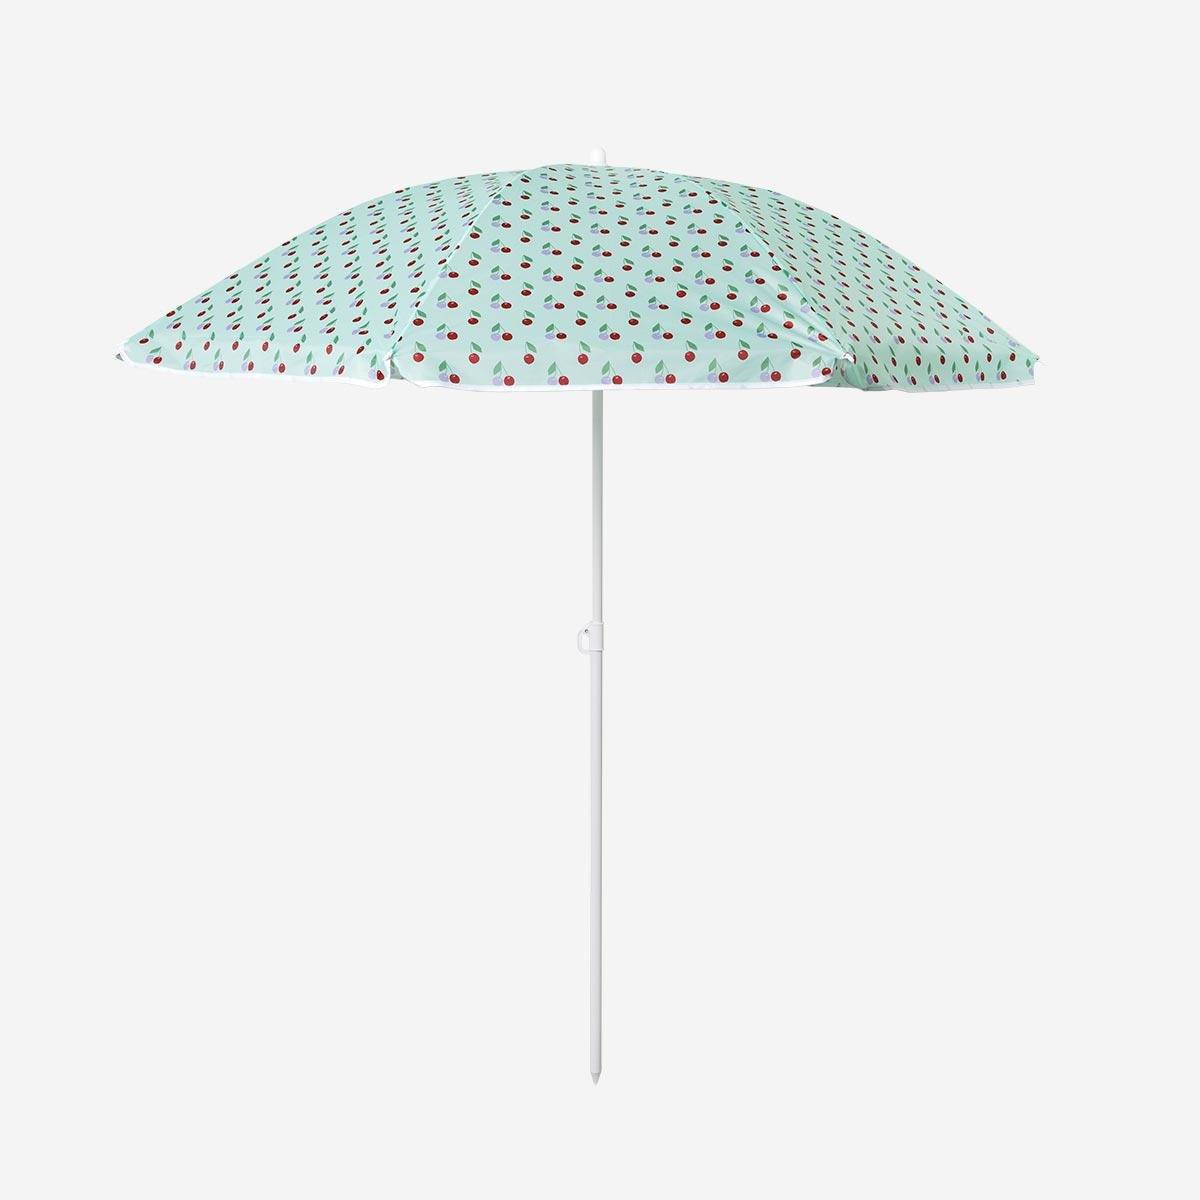 Parasol. With UV protection